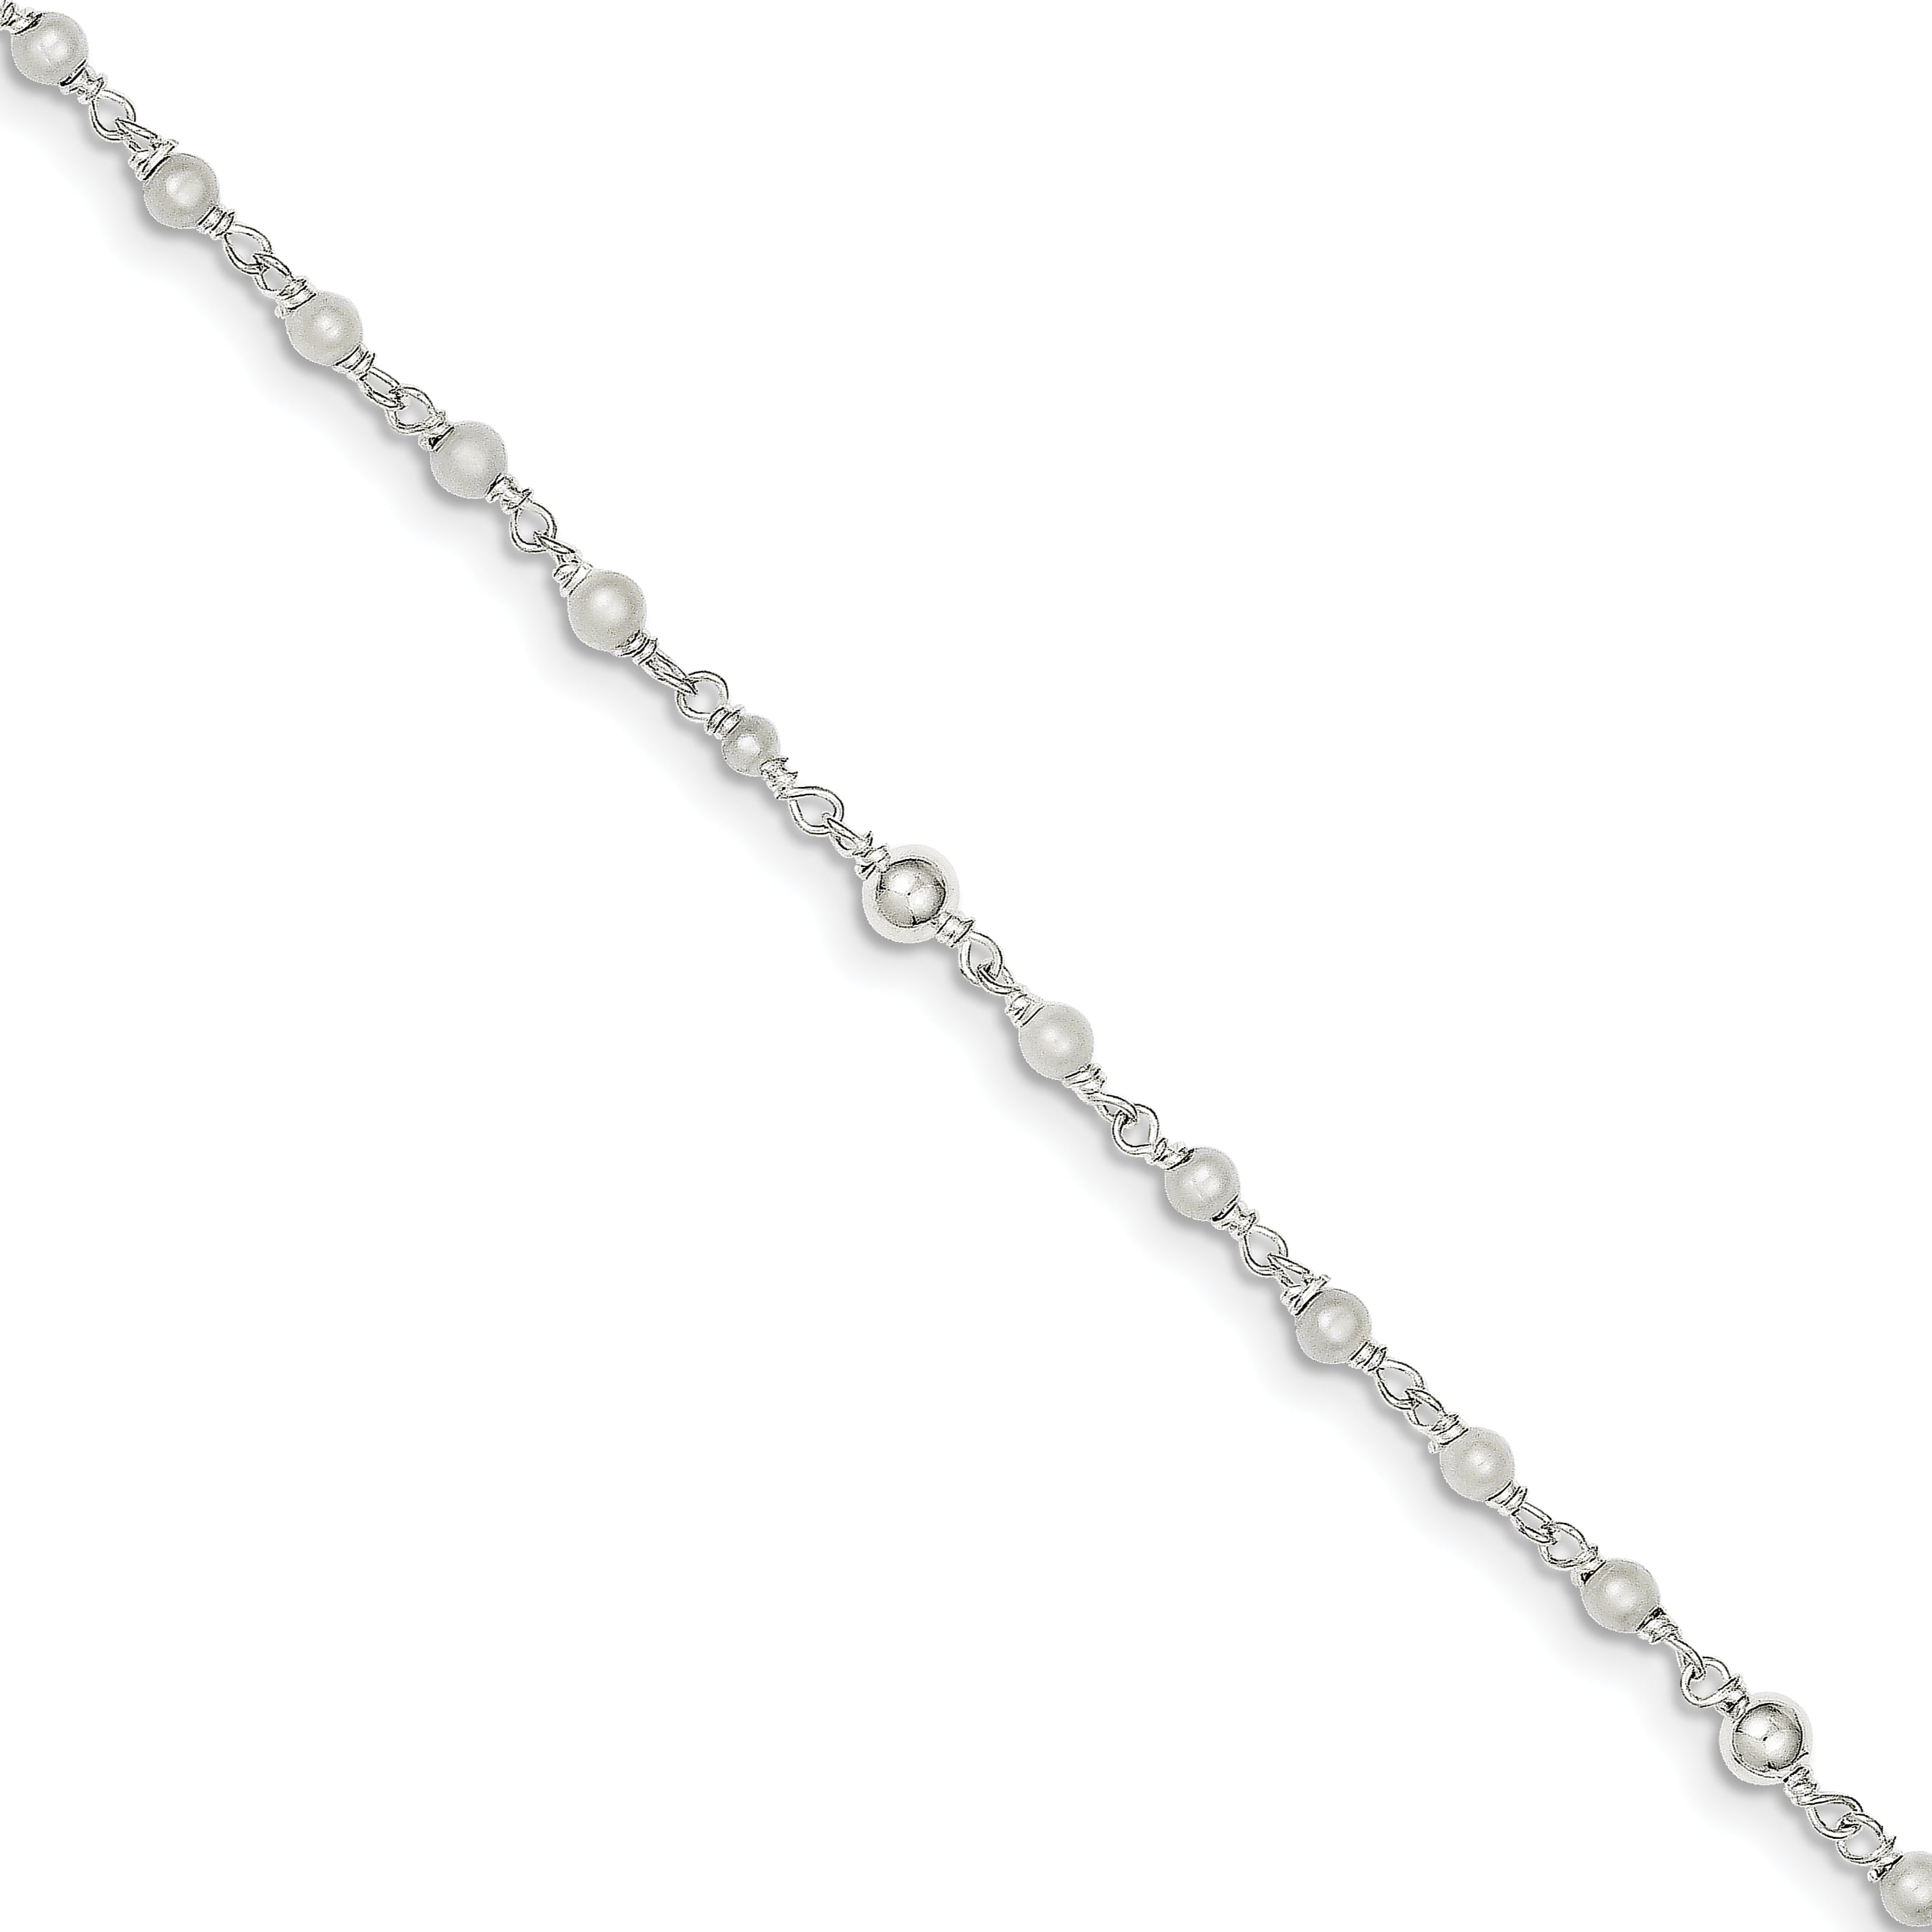 Gift for Women Solid Sterling Silver Ankle Chain Bracelet Heart Clasp Anklet